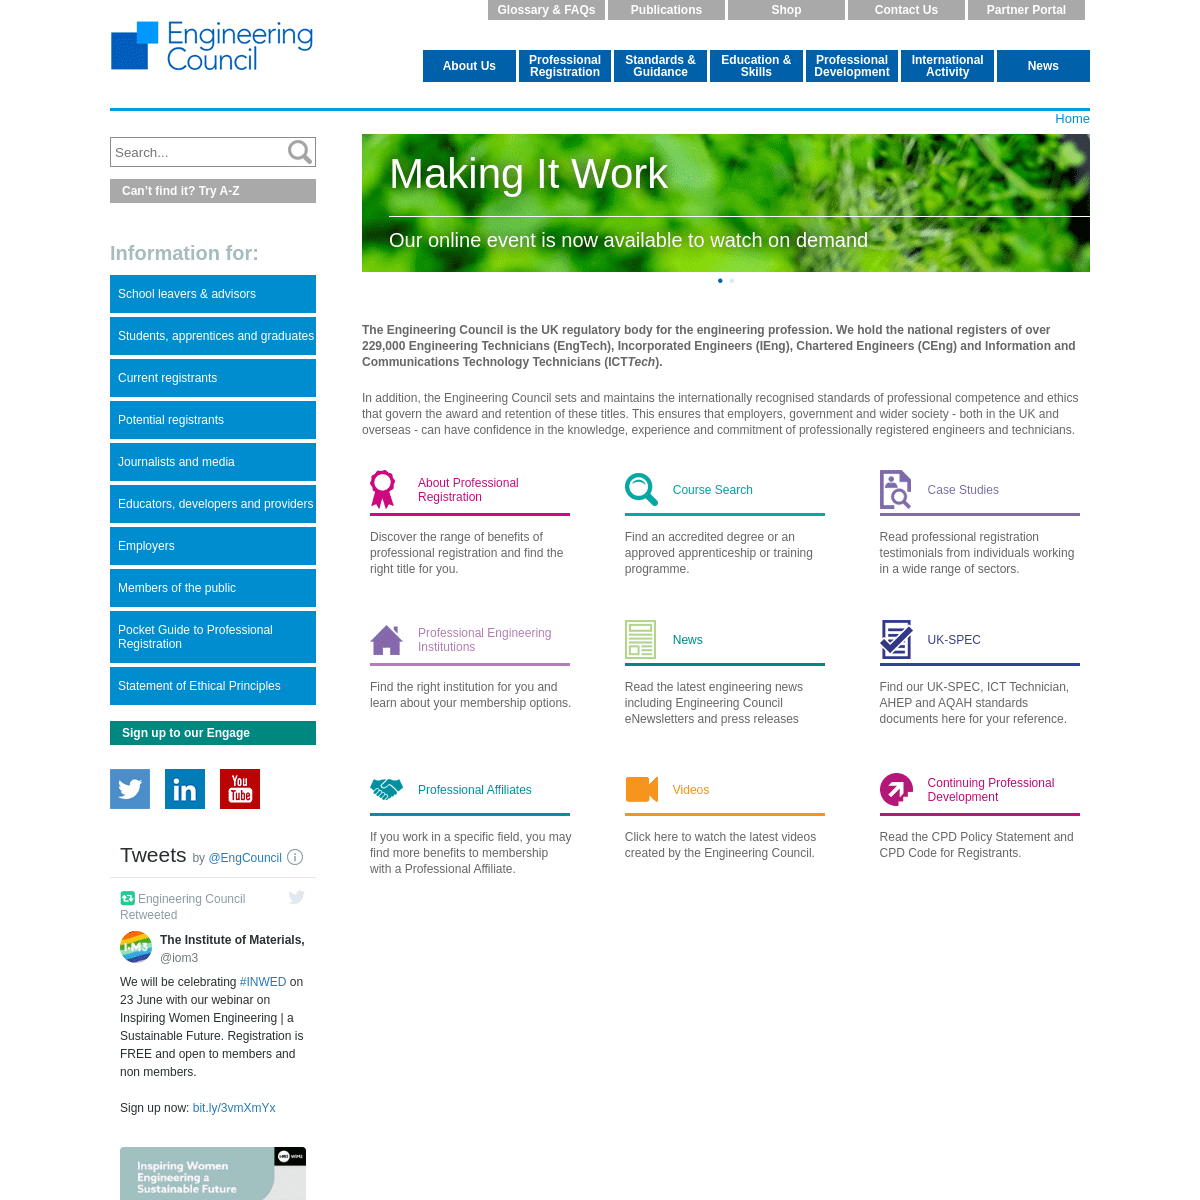 A complete backup of https://engc.org.uk